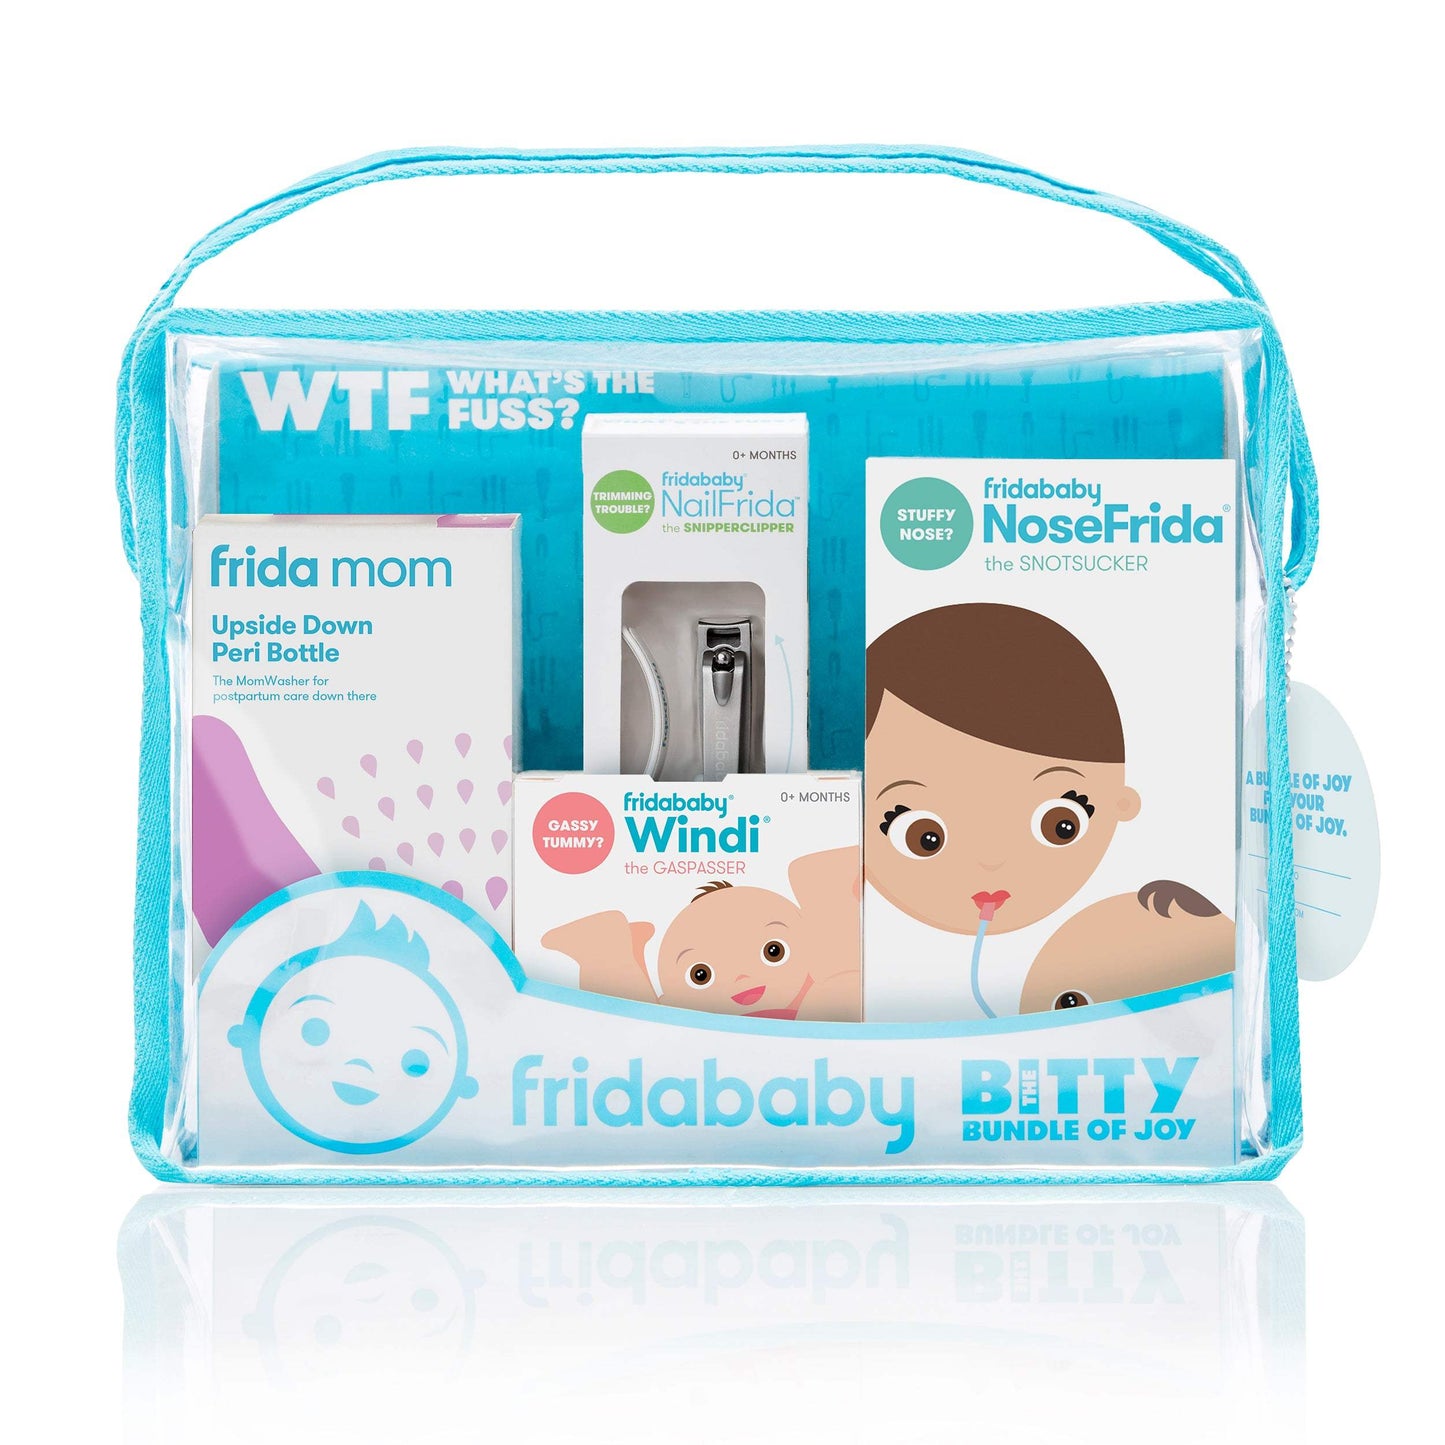 Bitty Bundle of Joy the FUSSBUSTERS™ TOOLKIT